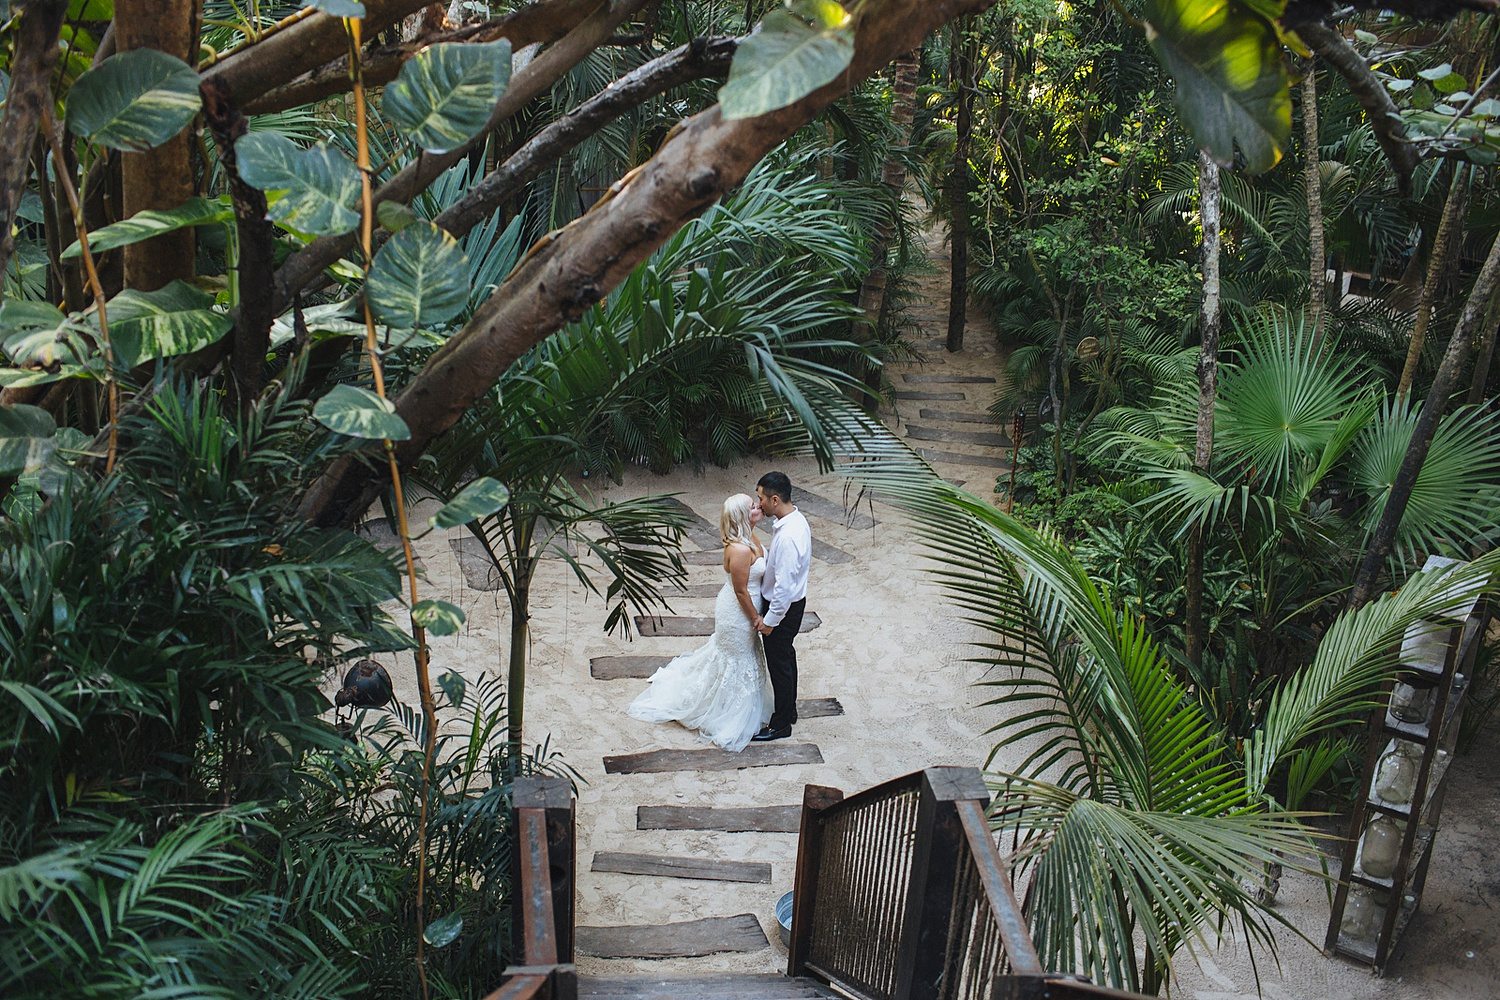 A couple in a wedding dress and shirt sleeves from a black tux stand amidst lush green tropical plants on a sandy path at their destination wedding